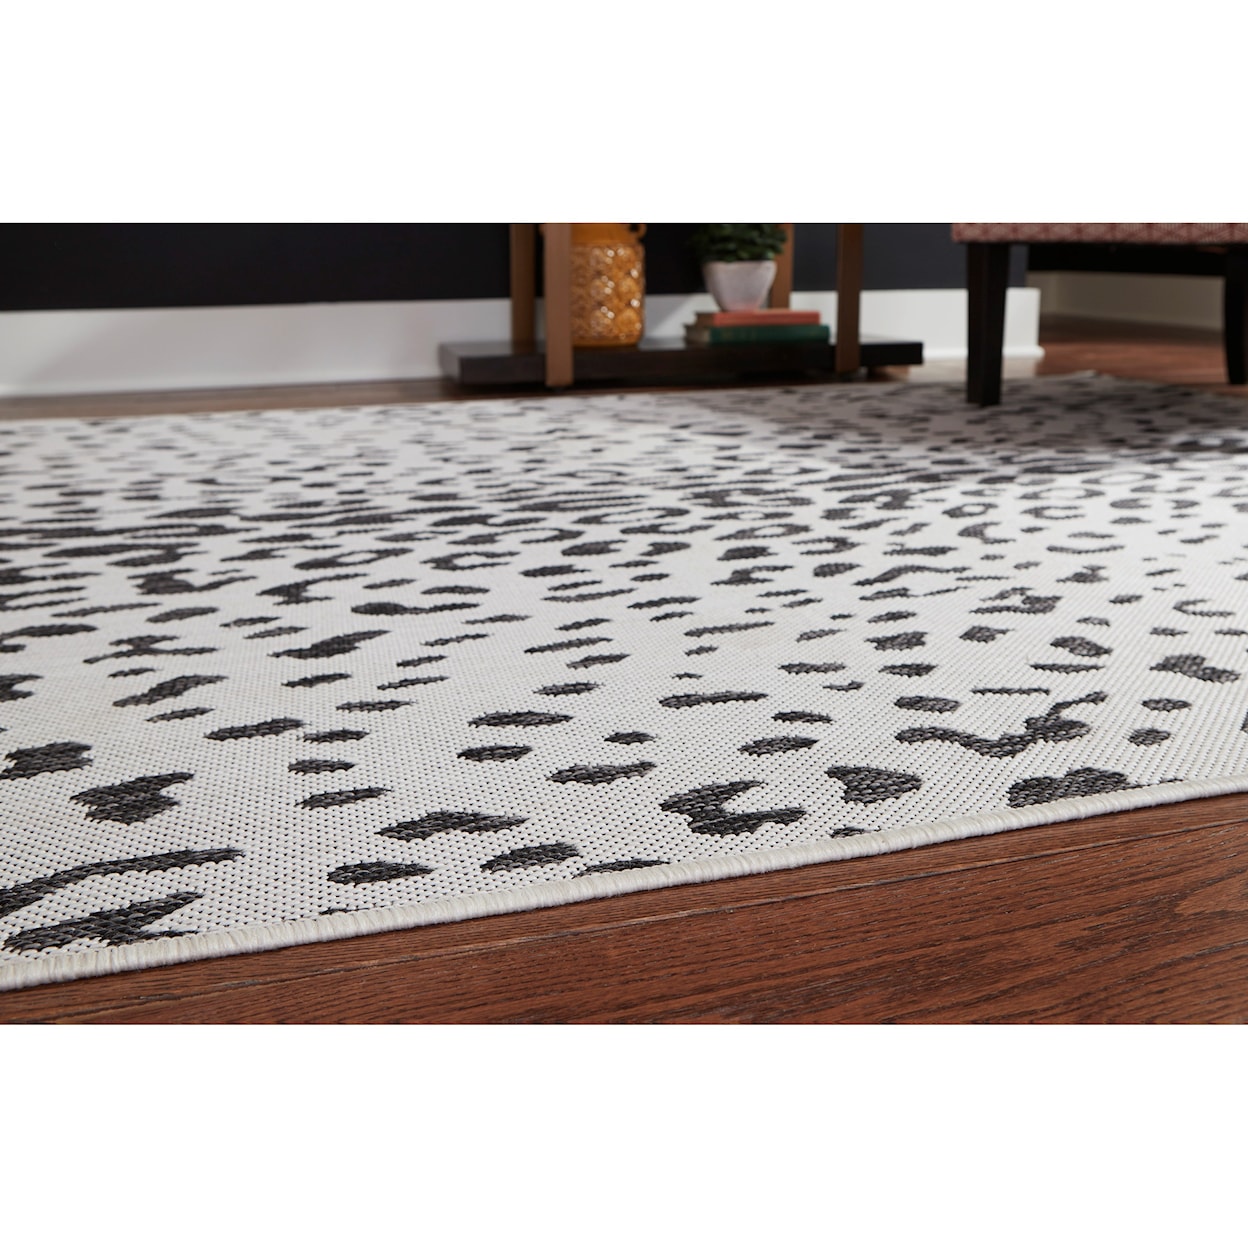 Signature Design by Ashley Contemporary Area Rugs Samya Black/White Indoor/Outdoor Large Rug